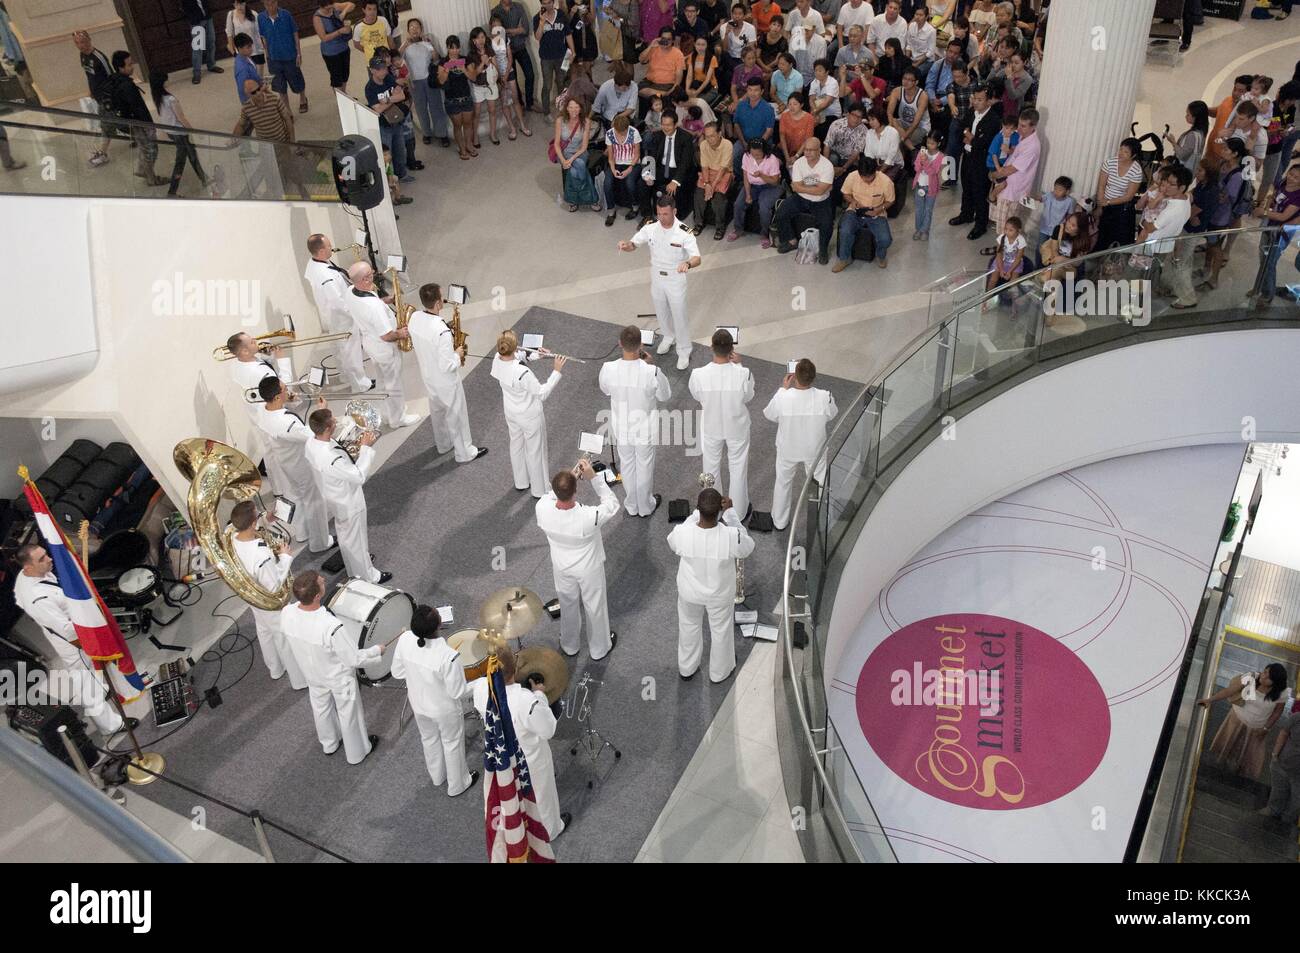 Members of the US 7th Fleet Far East Edition Band entertain Thai nationals during a show at the Terminal 21 Mall in Bangkok, Thailand. Image courtesy Mass Communication Specialist 3rd Class Colin M. Sheridan/US Navy, 2012. Stock Photo